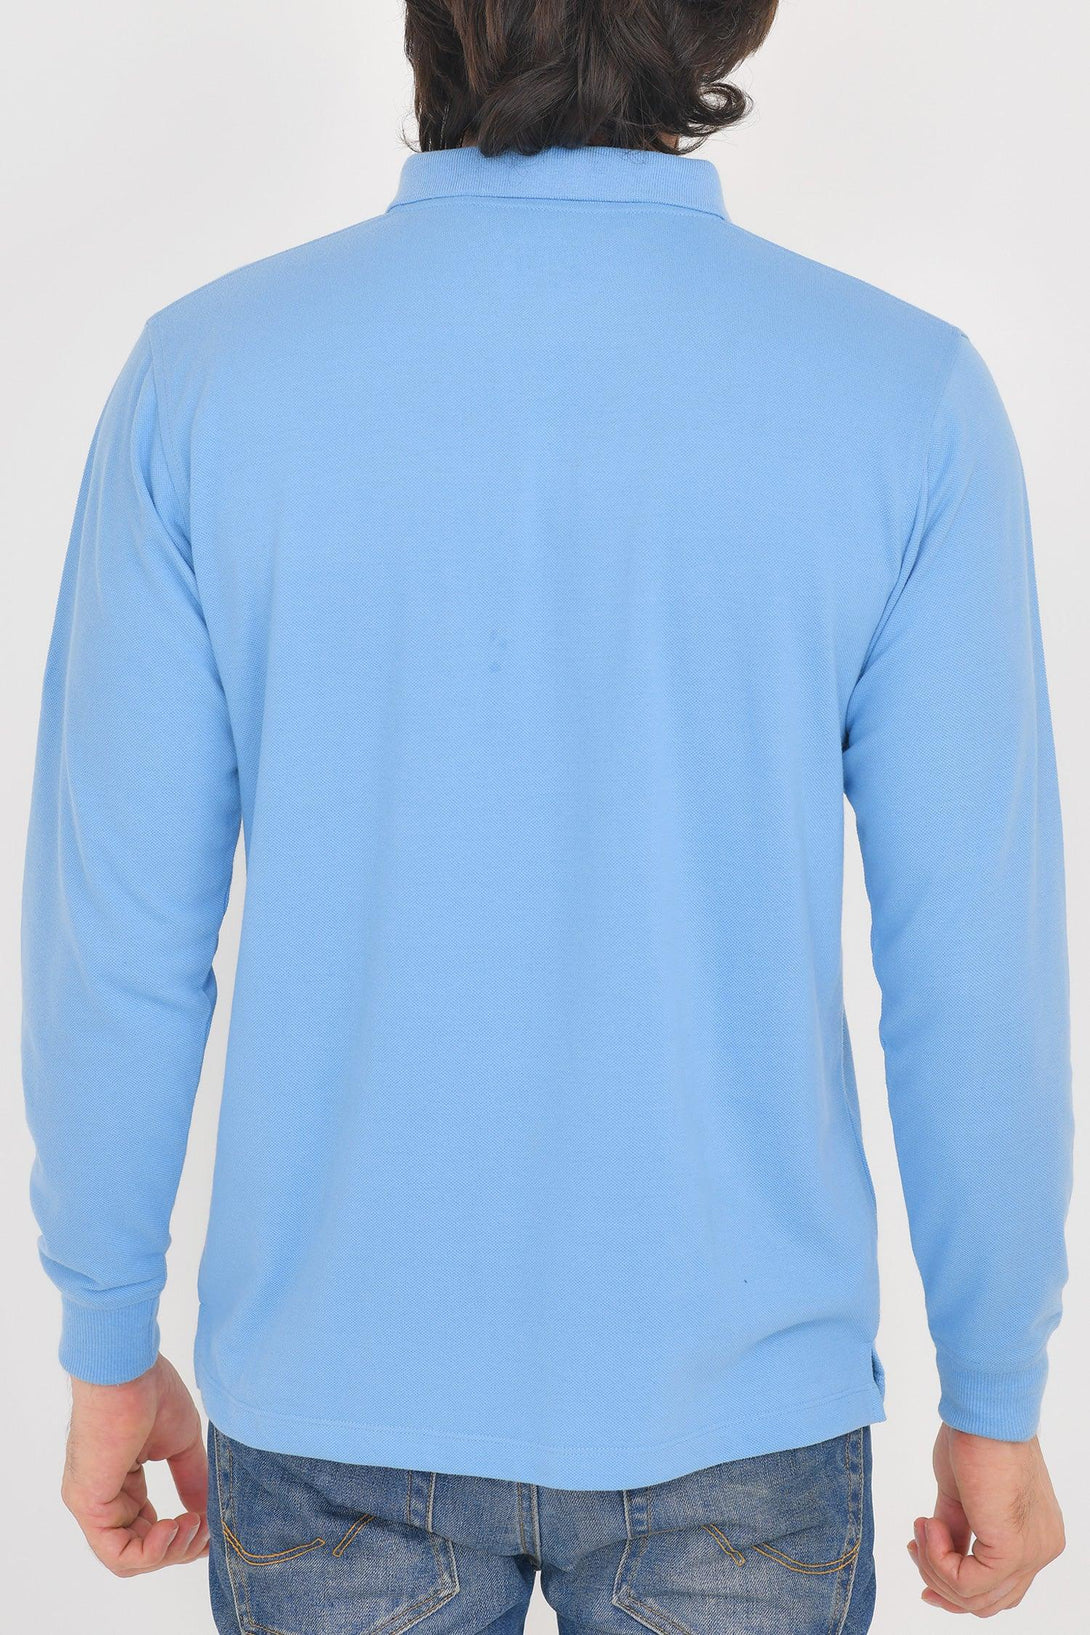 Polo Full Sleeve - Lite Blue - Sea Green - Pack of 2 - FTS